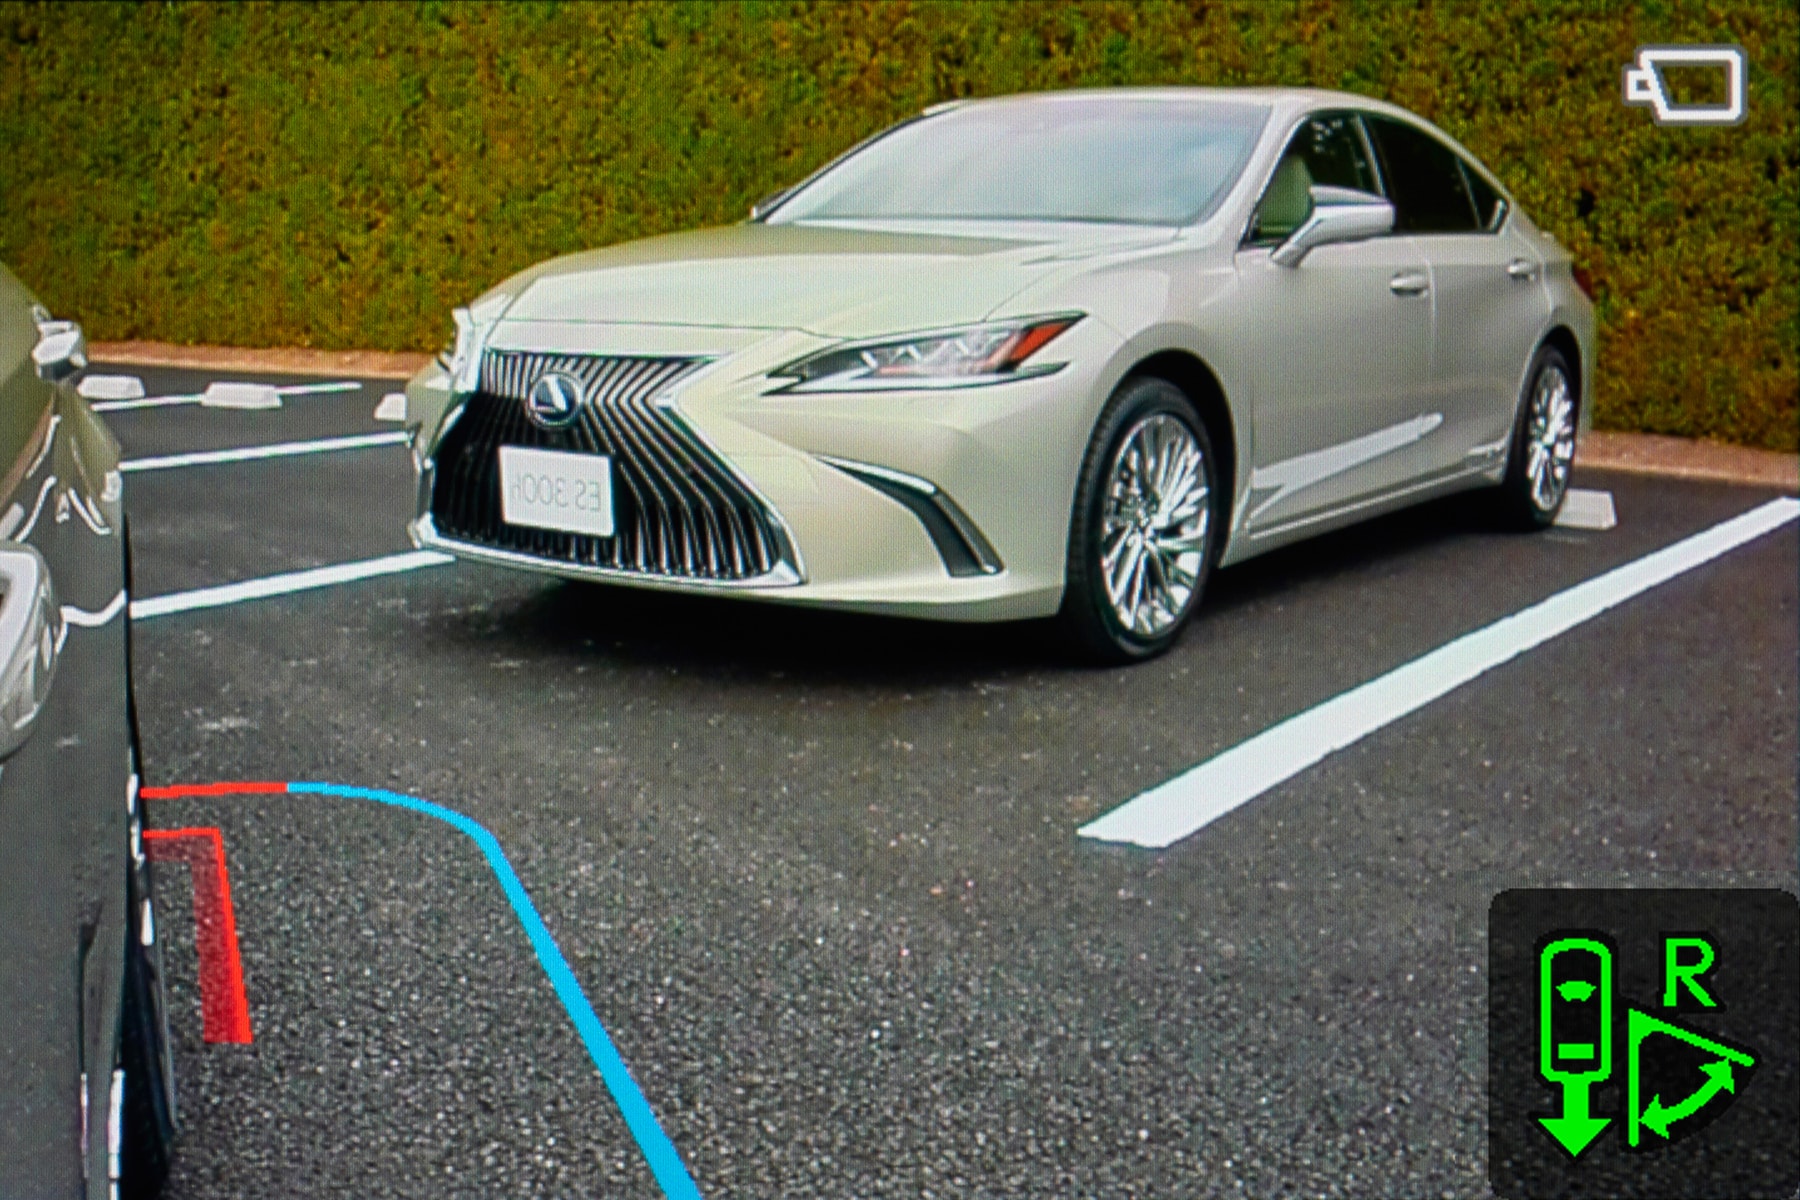 Lexus ES 2019 Side Mirrors Cameras replace switch swap mass production car vehicle japan october 2018 release buy